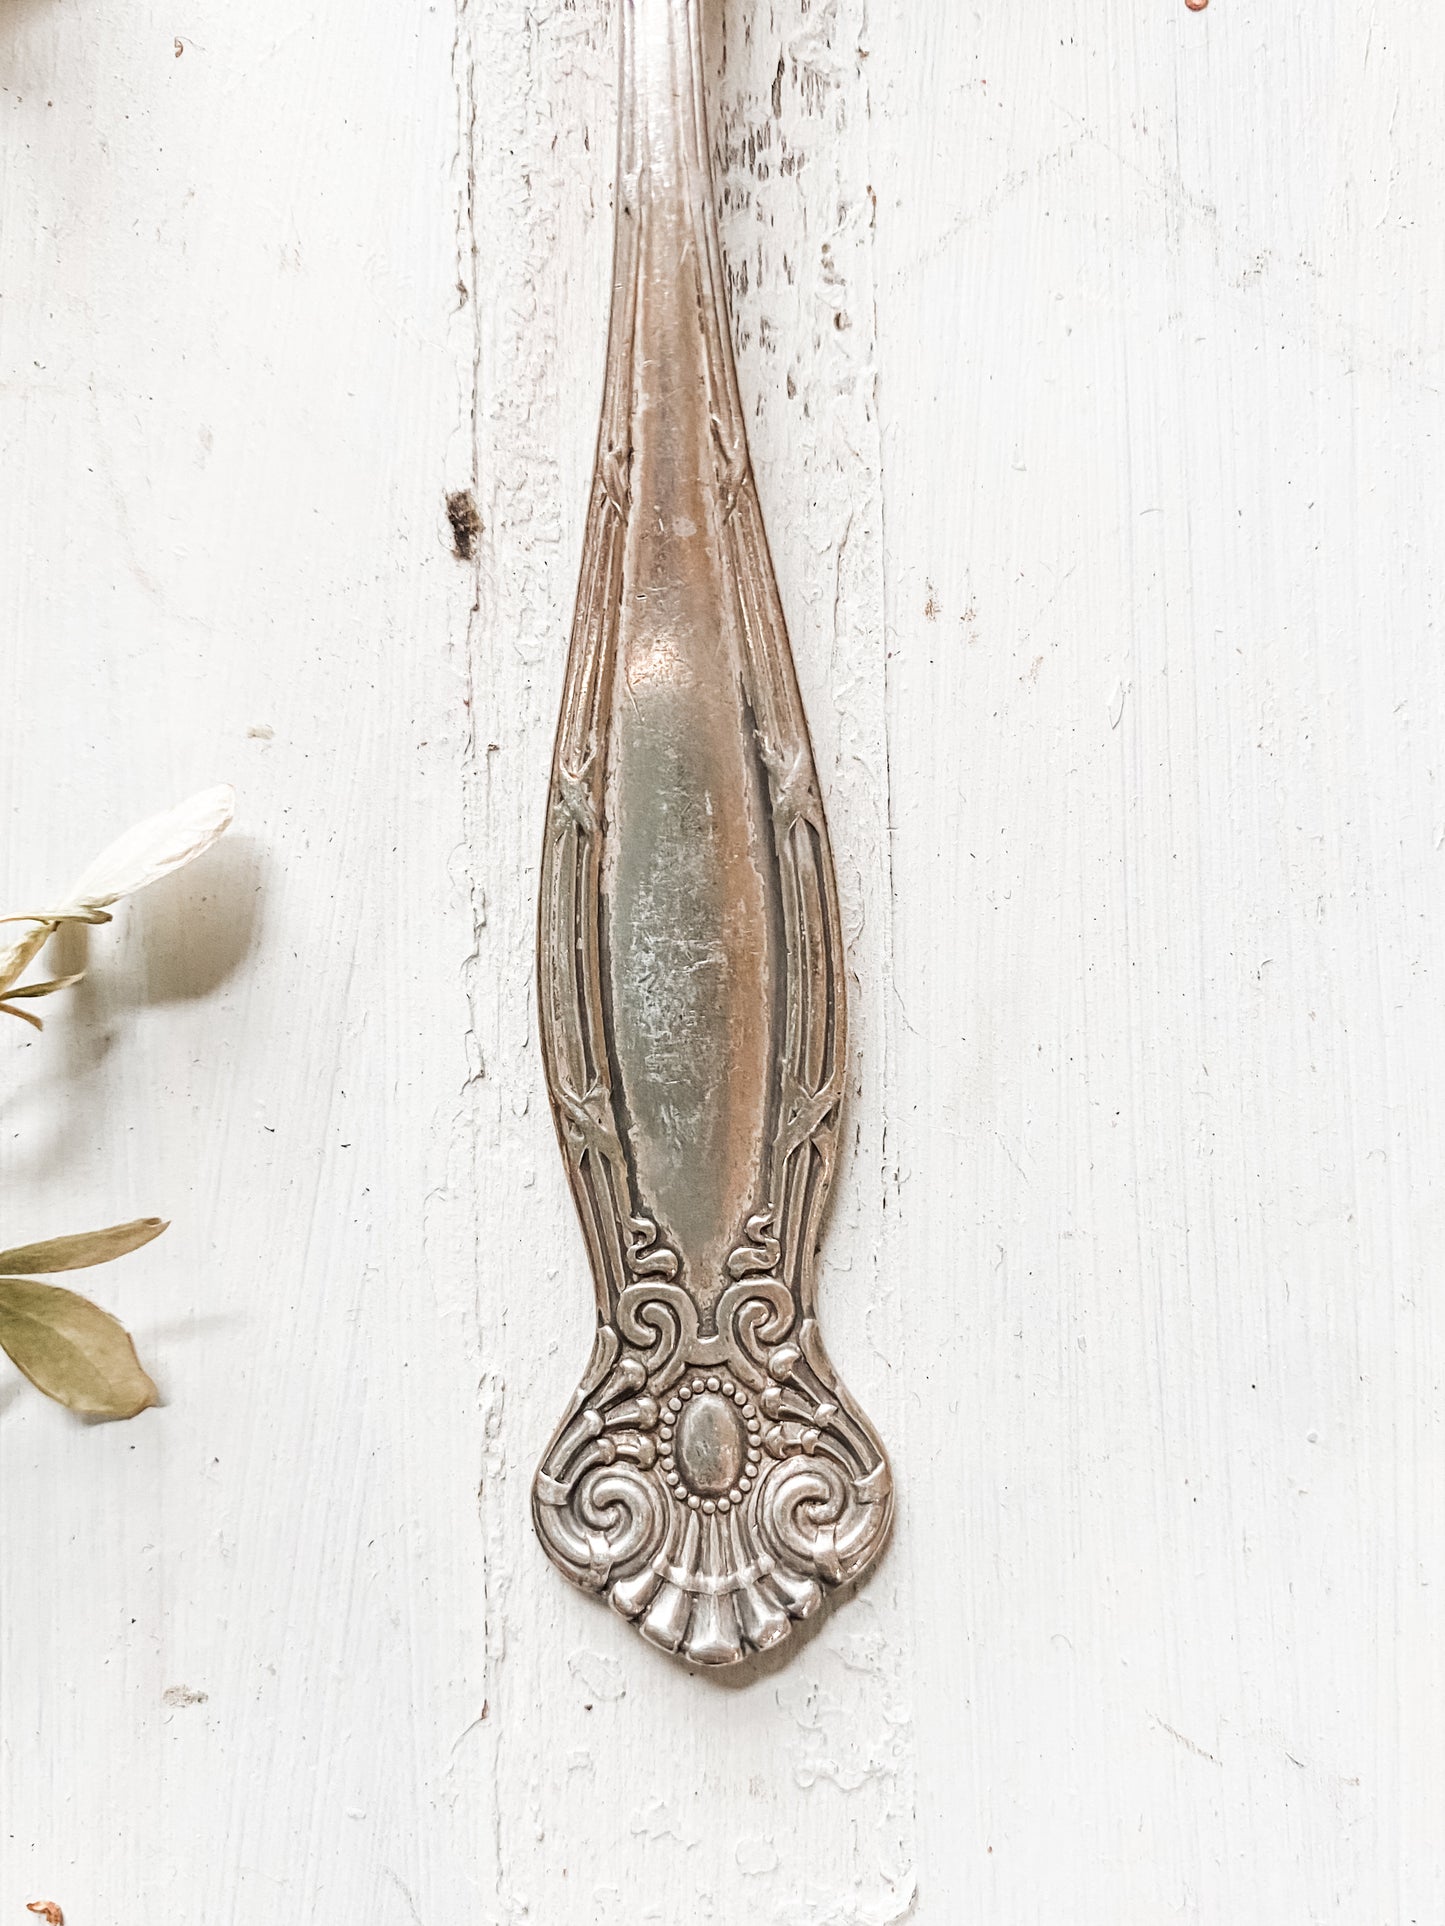 Empire by Towle Sterling Teaspoon